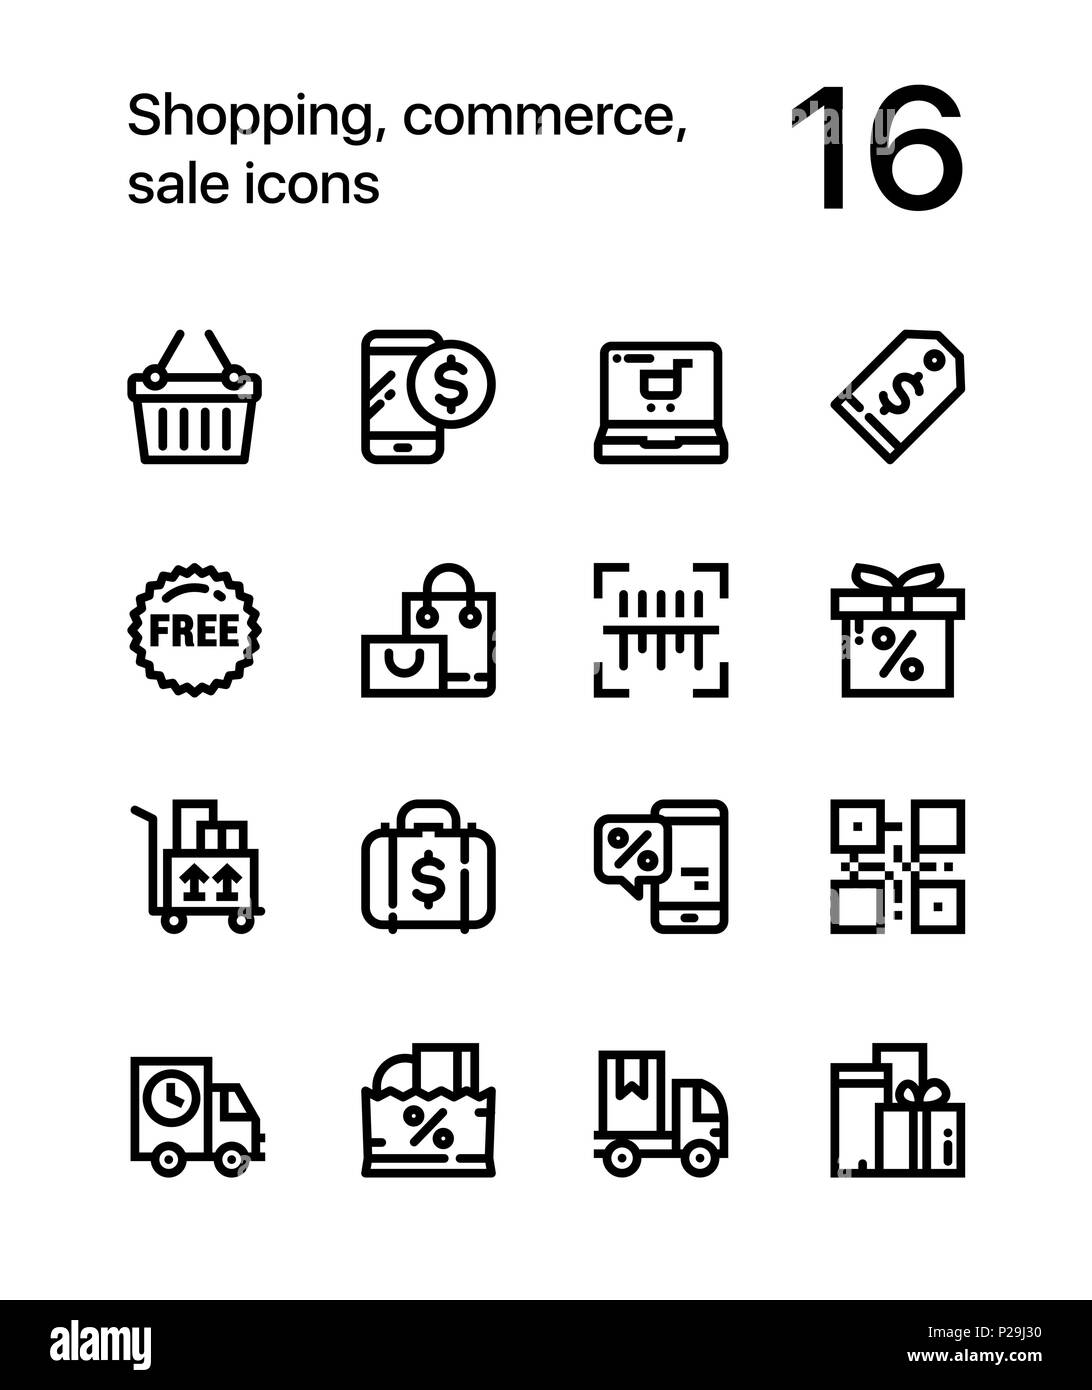 Shopping, commerce, sale icons for web and mobile design pack 2 Stock Vector